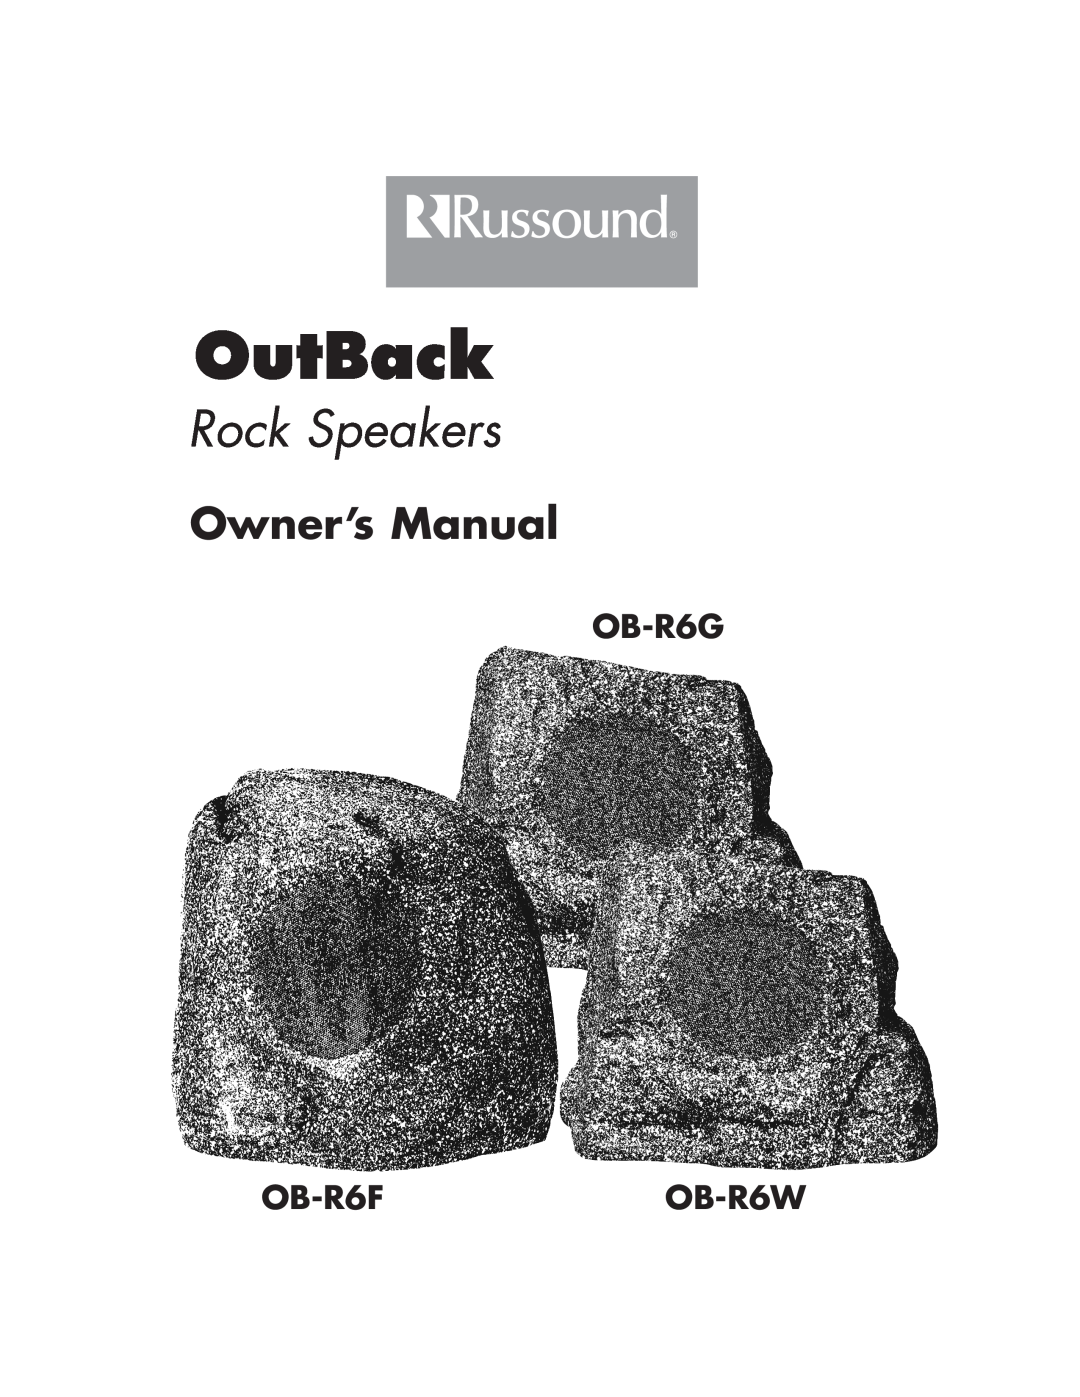 Russound owner manual OutBack, Rock Speakers, OB-R6G, OB-R6FOB-R6W, Owner’s Manual 